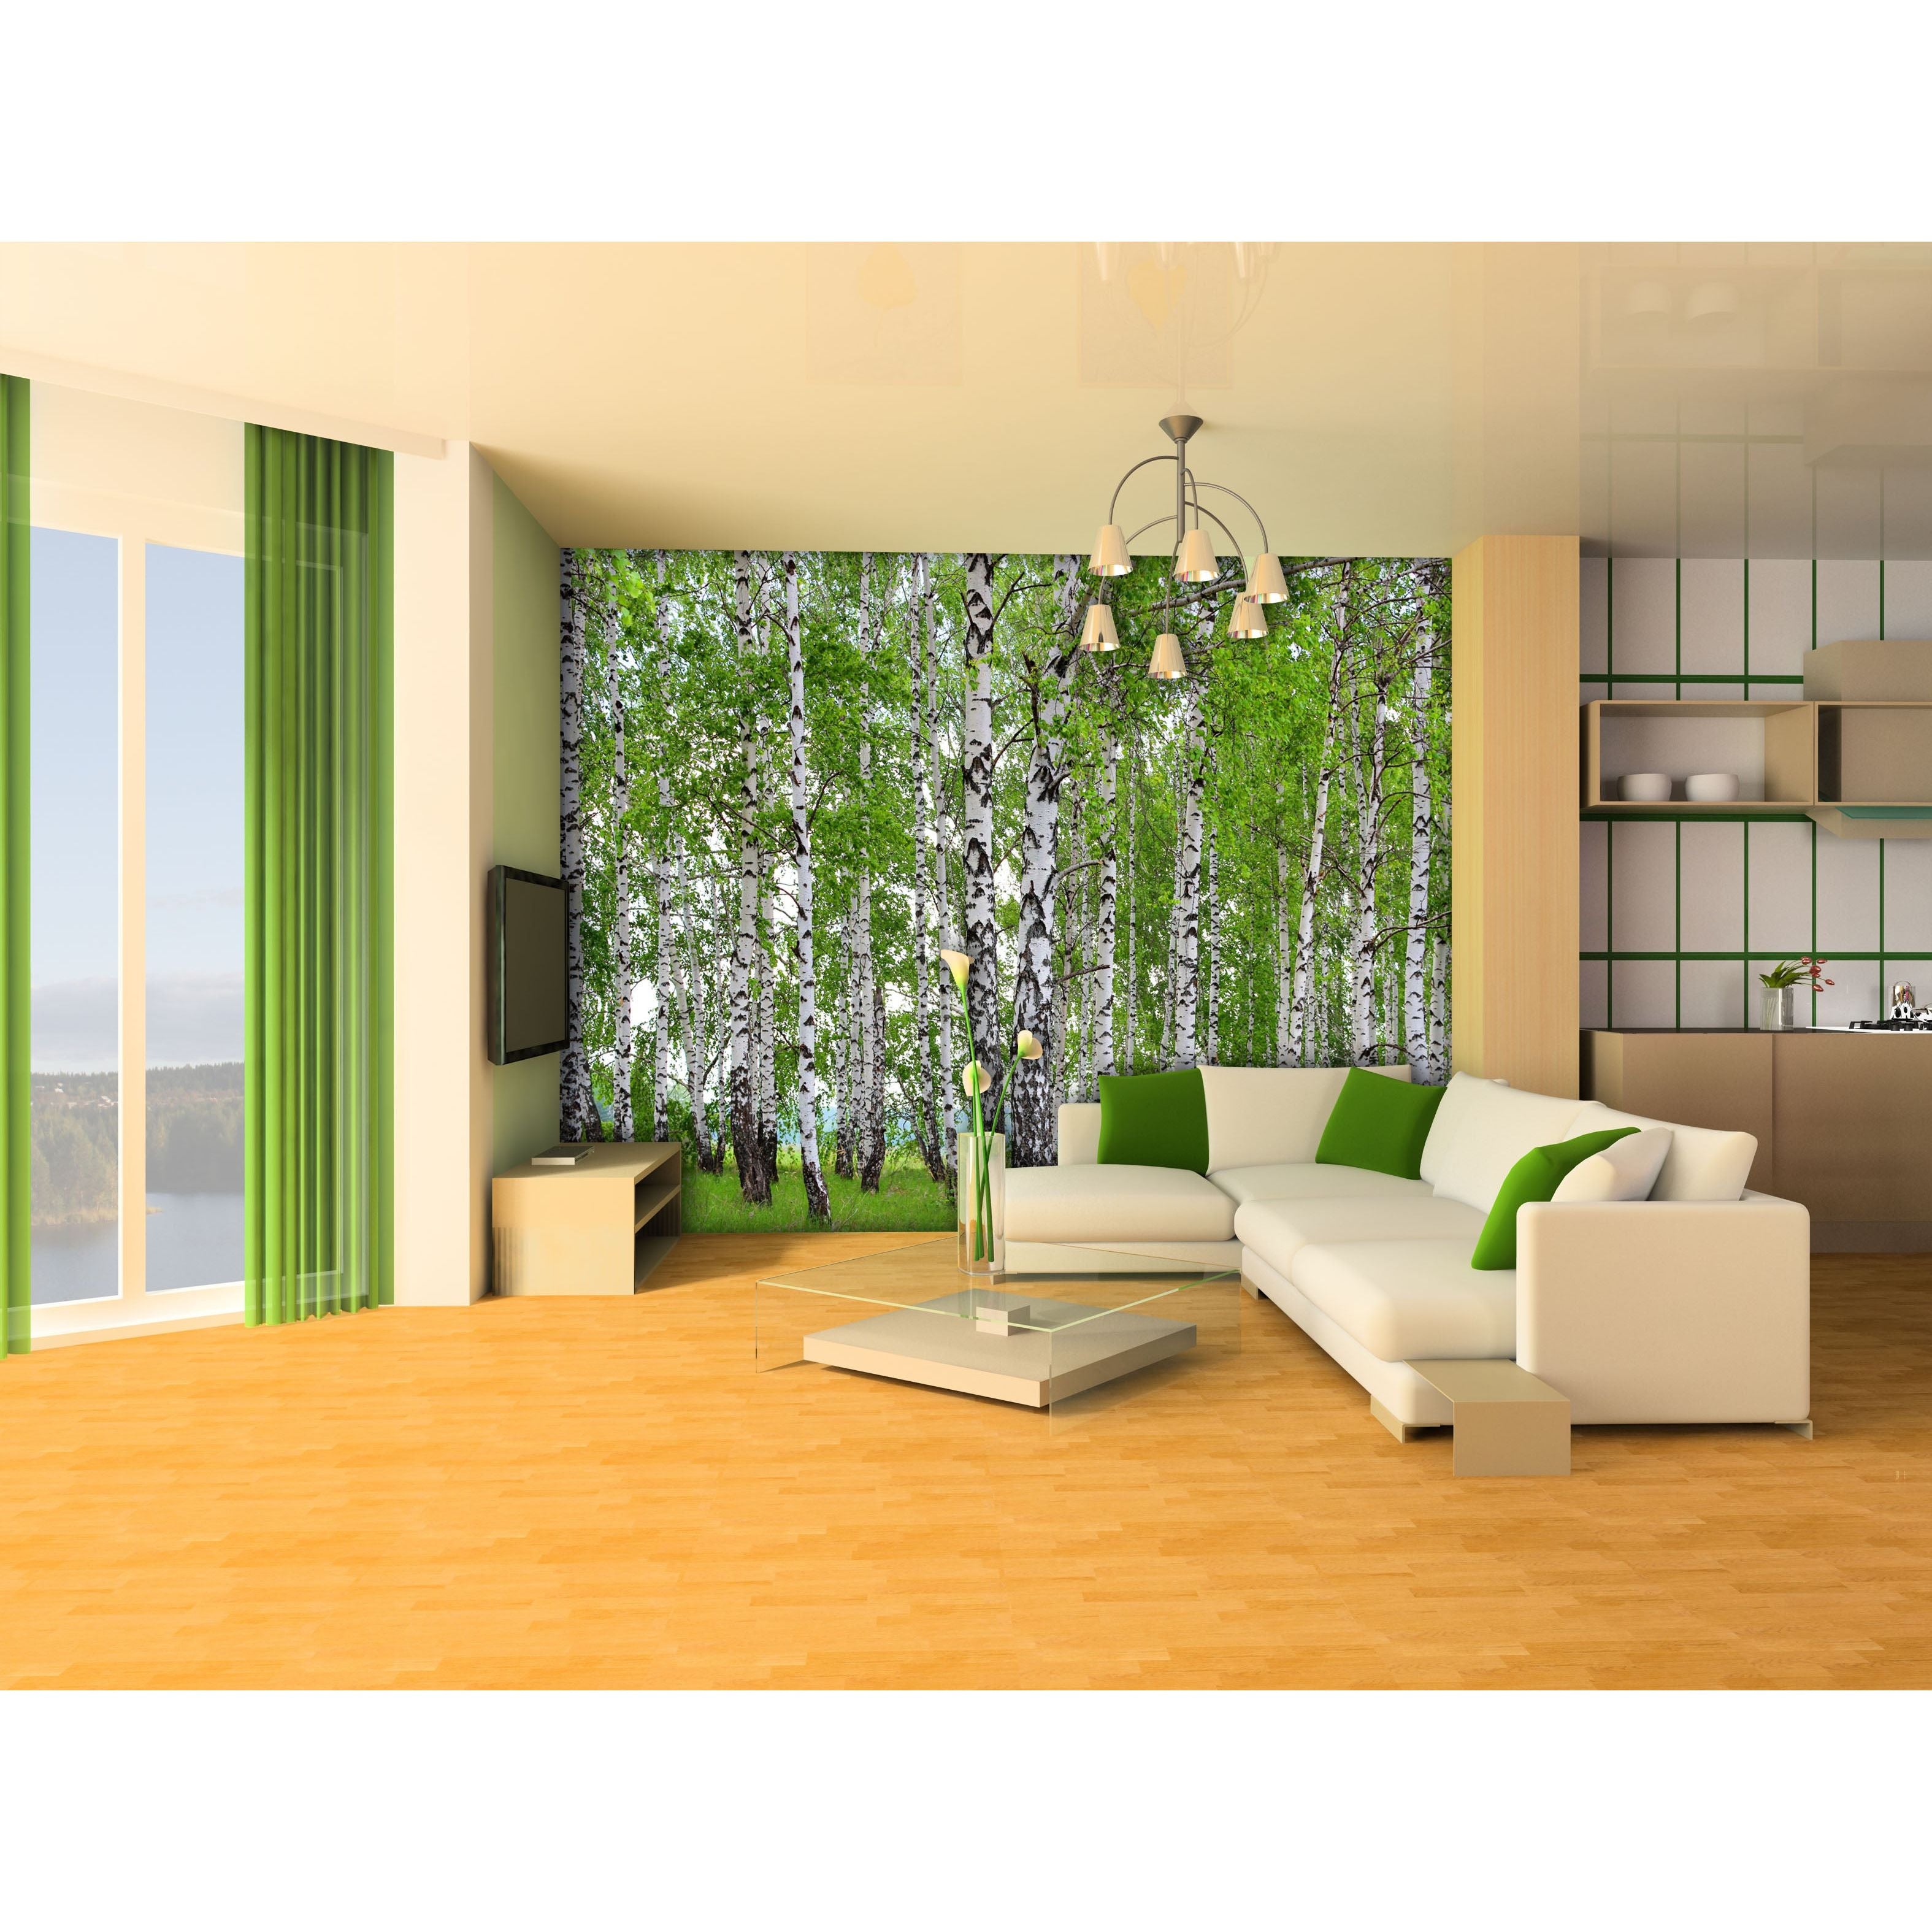 Verdant Canopy: Forest Trees, Green Leaves, and Grass Wall Mural